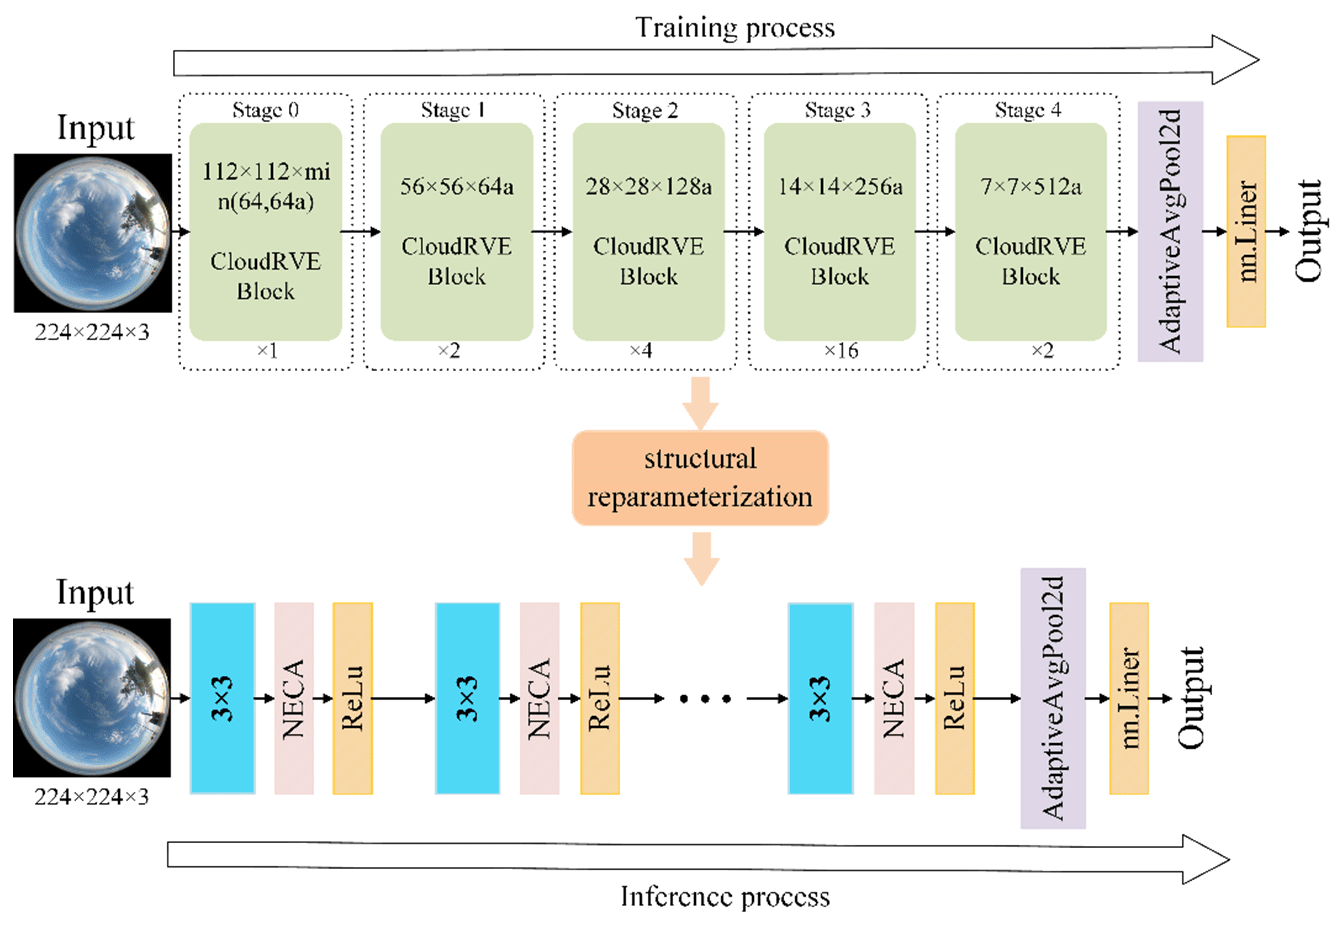 AMT - Improved RepVGG ground-based cloud image classification with